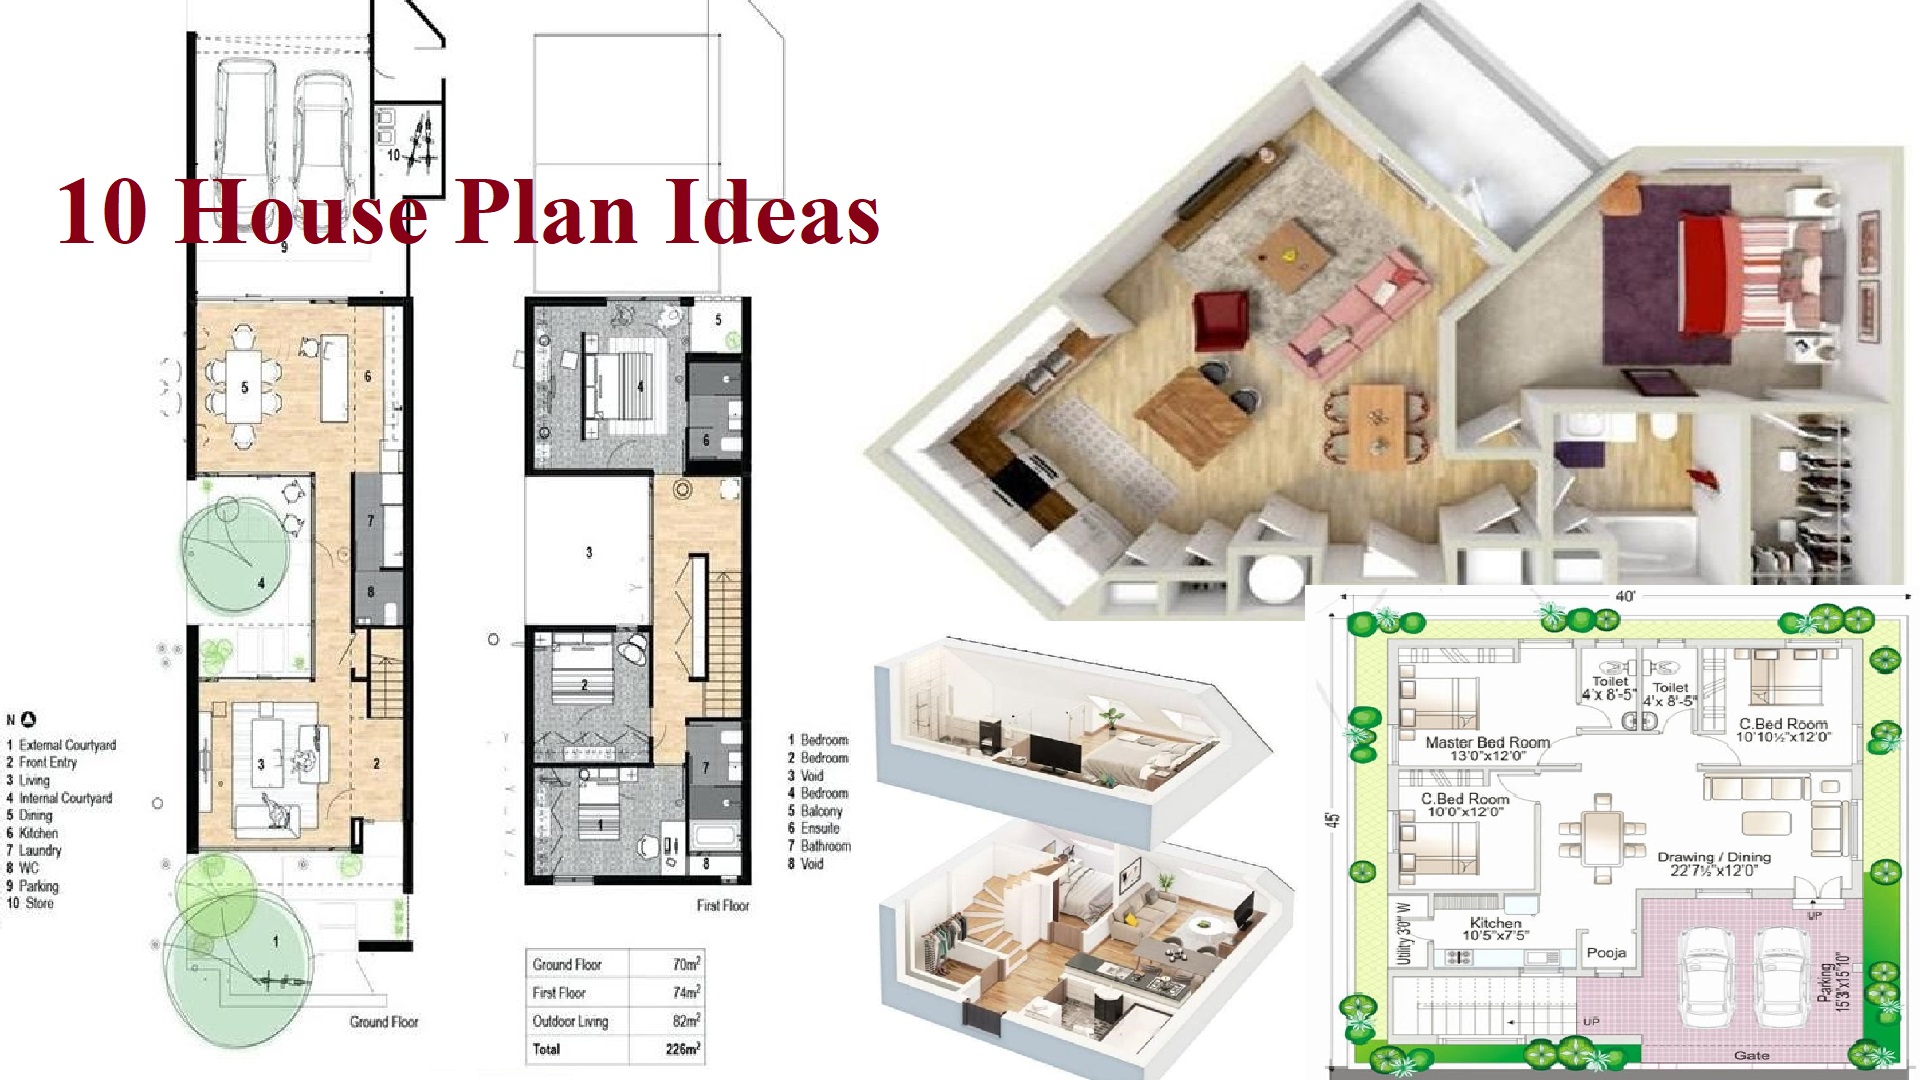 10 House Plan Ideas that will Help you in the Design of your Home